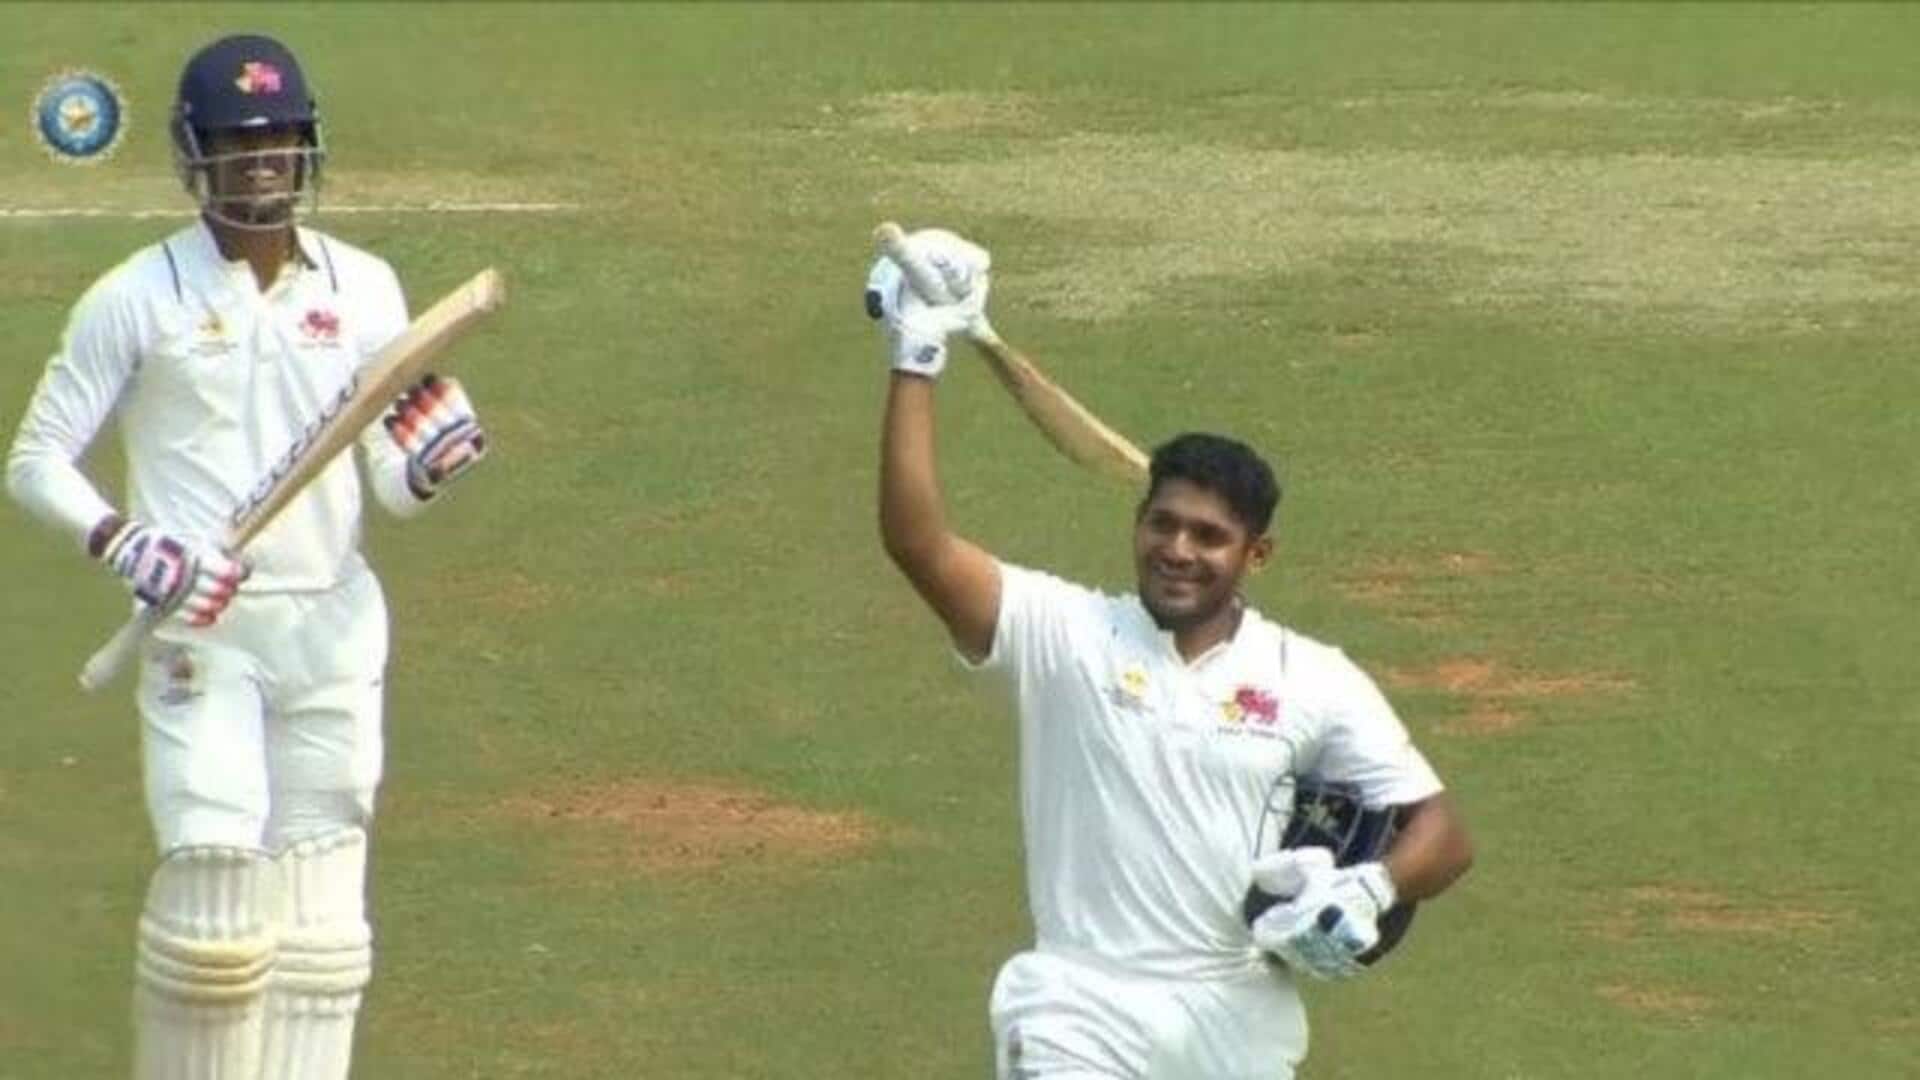 Ranji Trophy: Kotian, Deshpande shatter records with historic 10th-wicket partnership